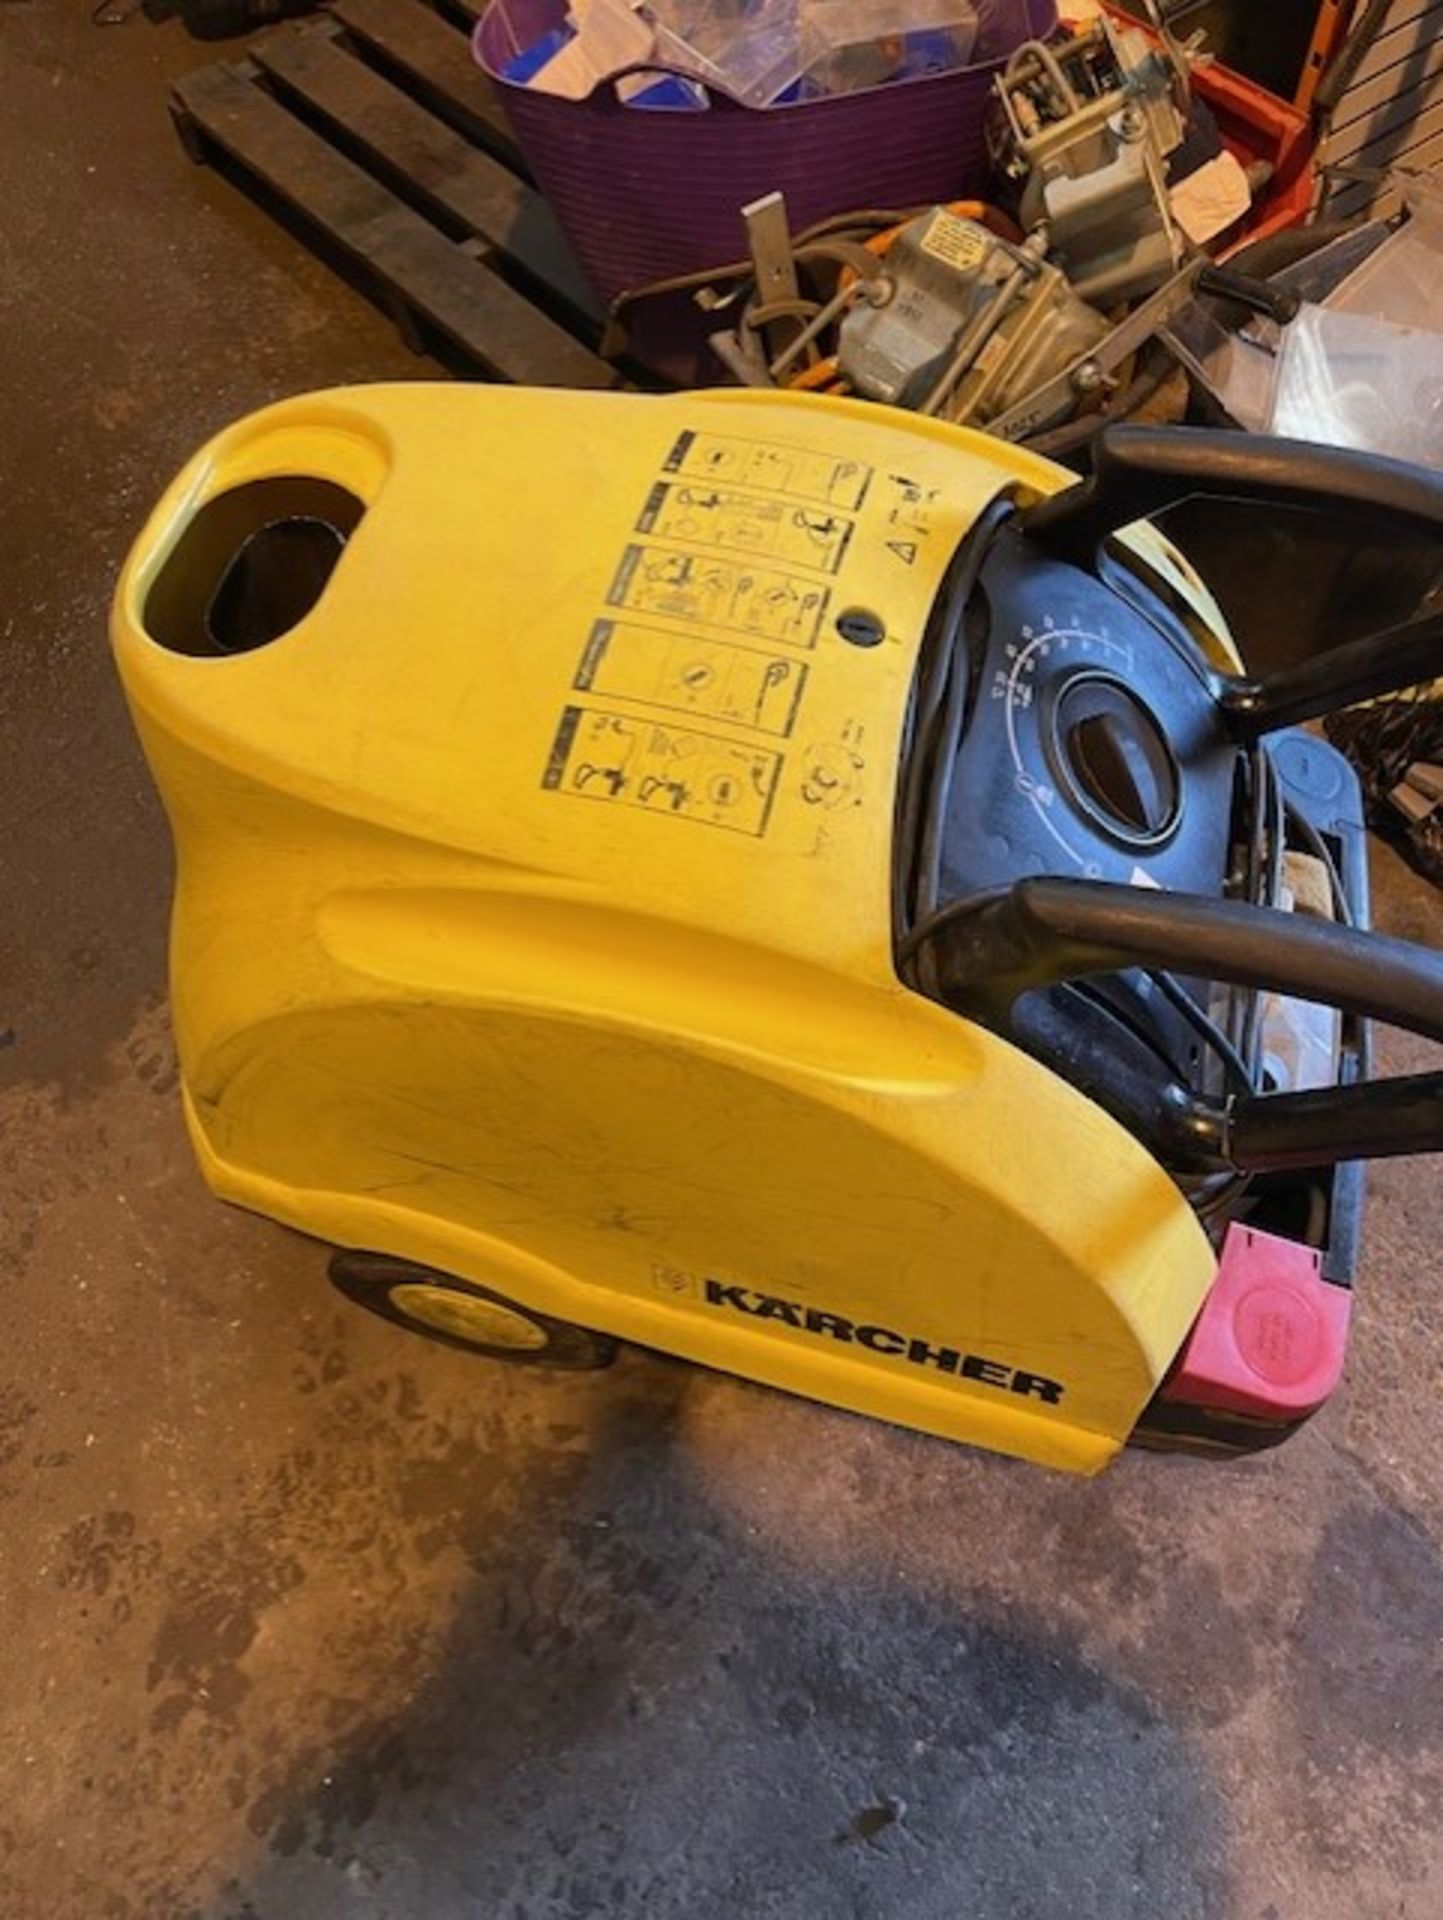 Karcher hot and cold pressure washer hds551 c model it’s in good condition still comes with hose and - Bild 9 aus 10